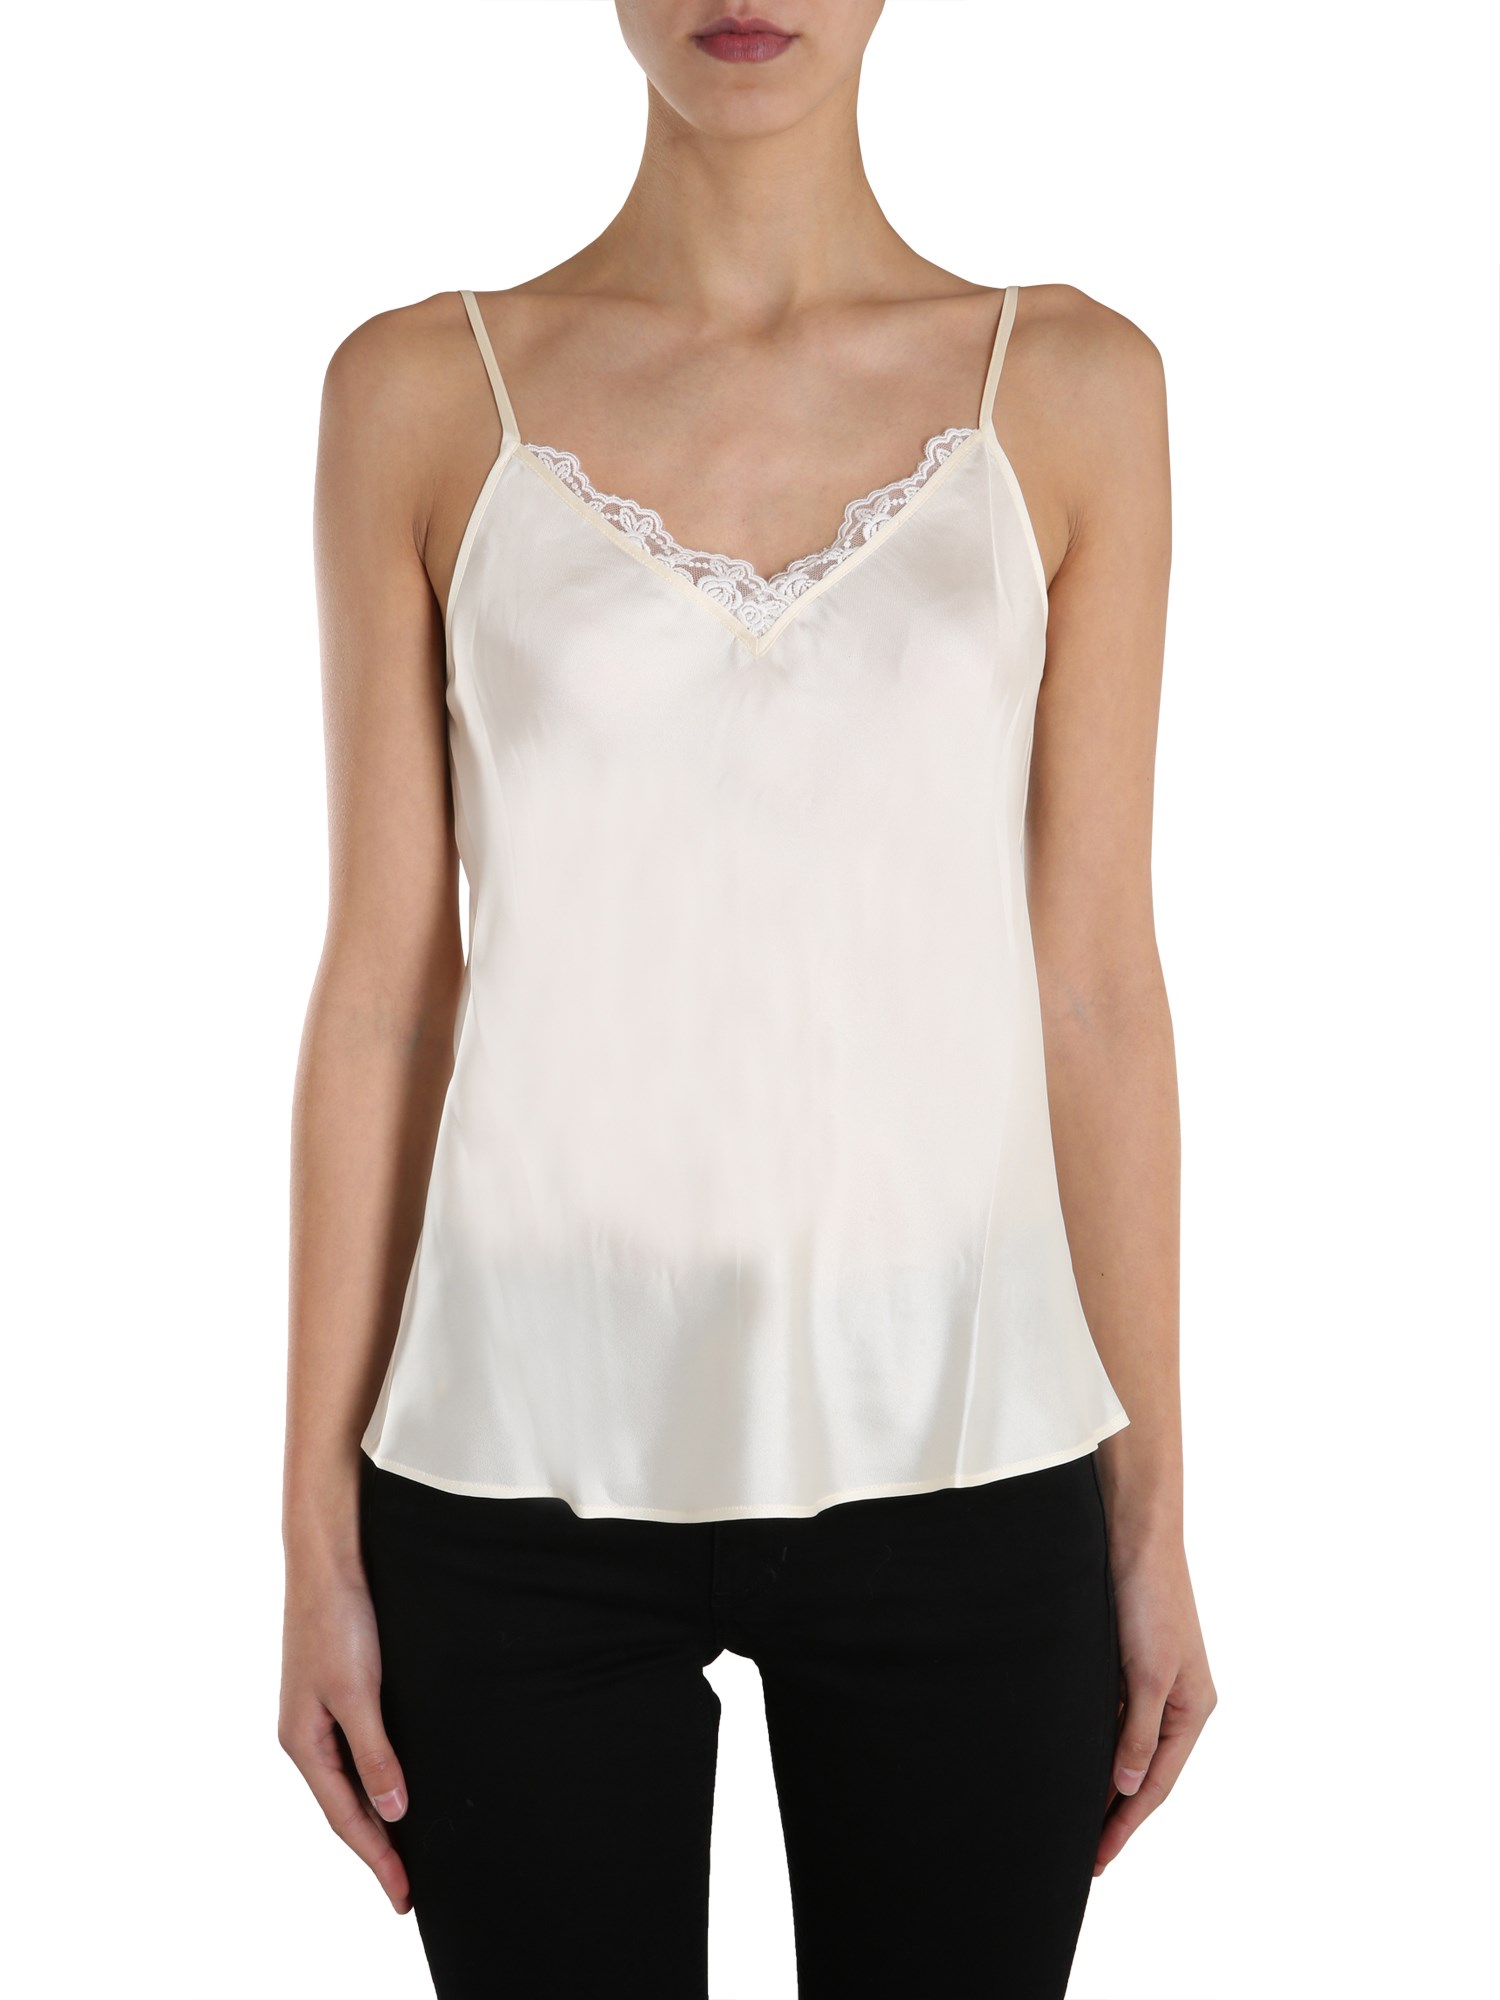 TORY BURCH "LACE PIECED" TOP,180563